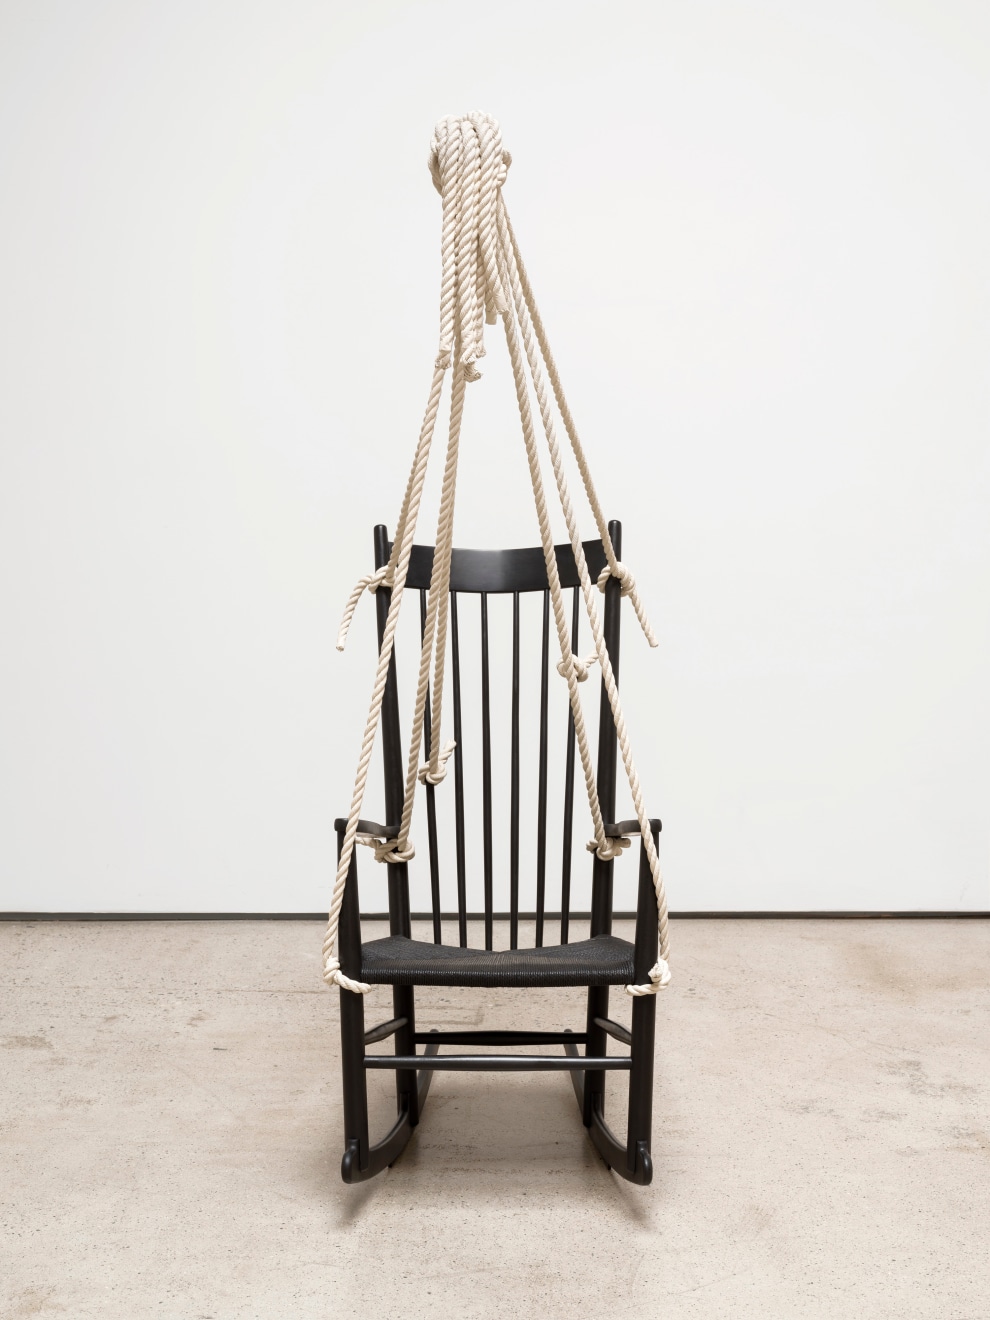 Ricky Swallow Rocking Chair with Rope (meditation chair #1), 2020